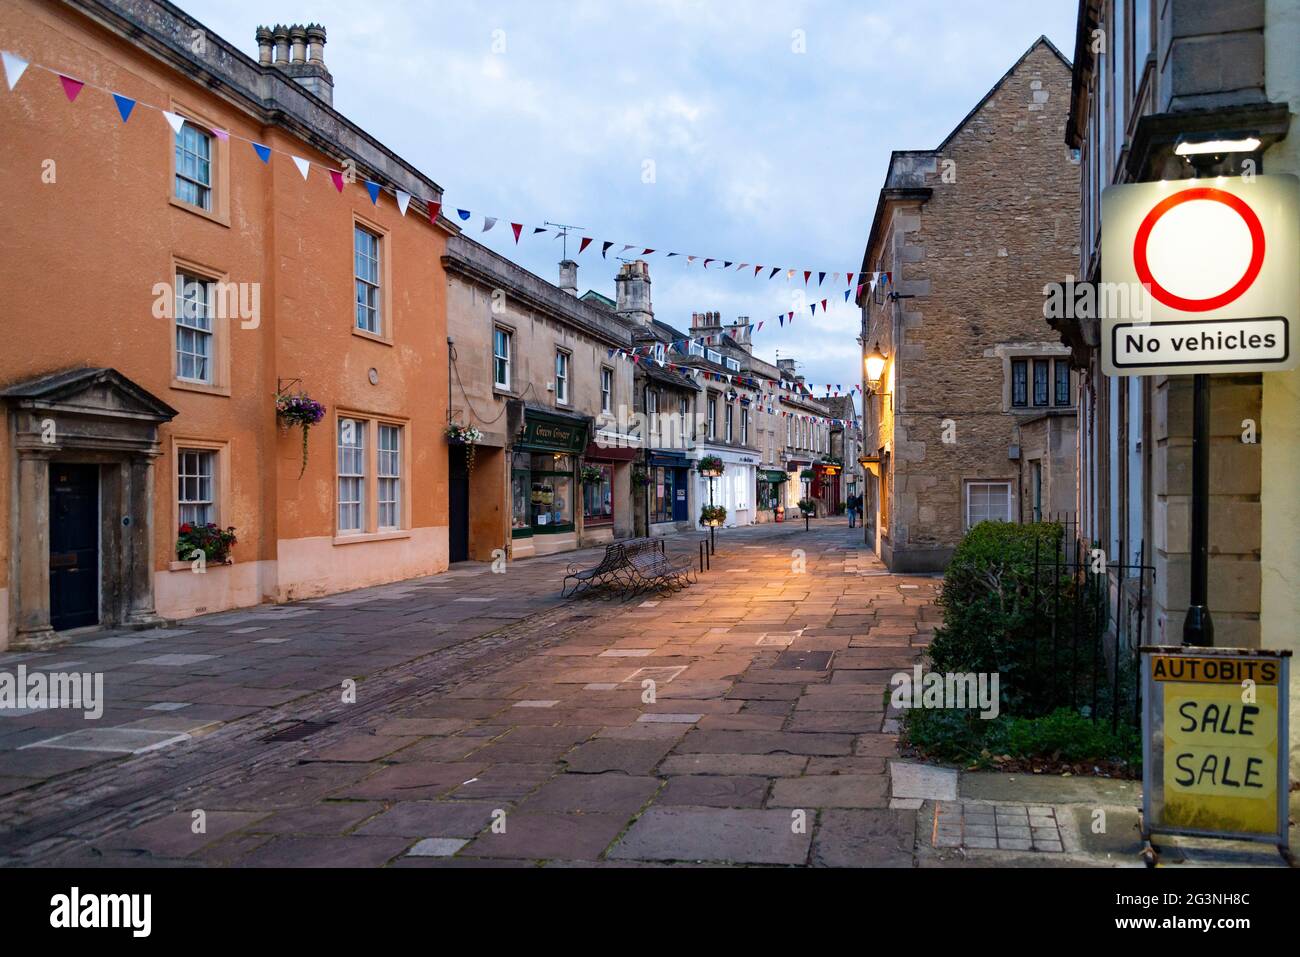 CORSHAM, UK - JULY 17, 2015: street and old buildings in the small medieval village of Corsham, south of England, UK Stock Photo